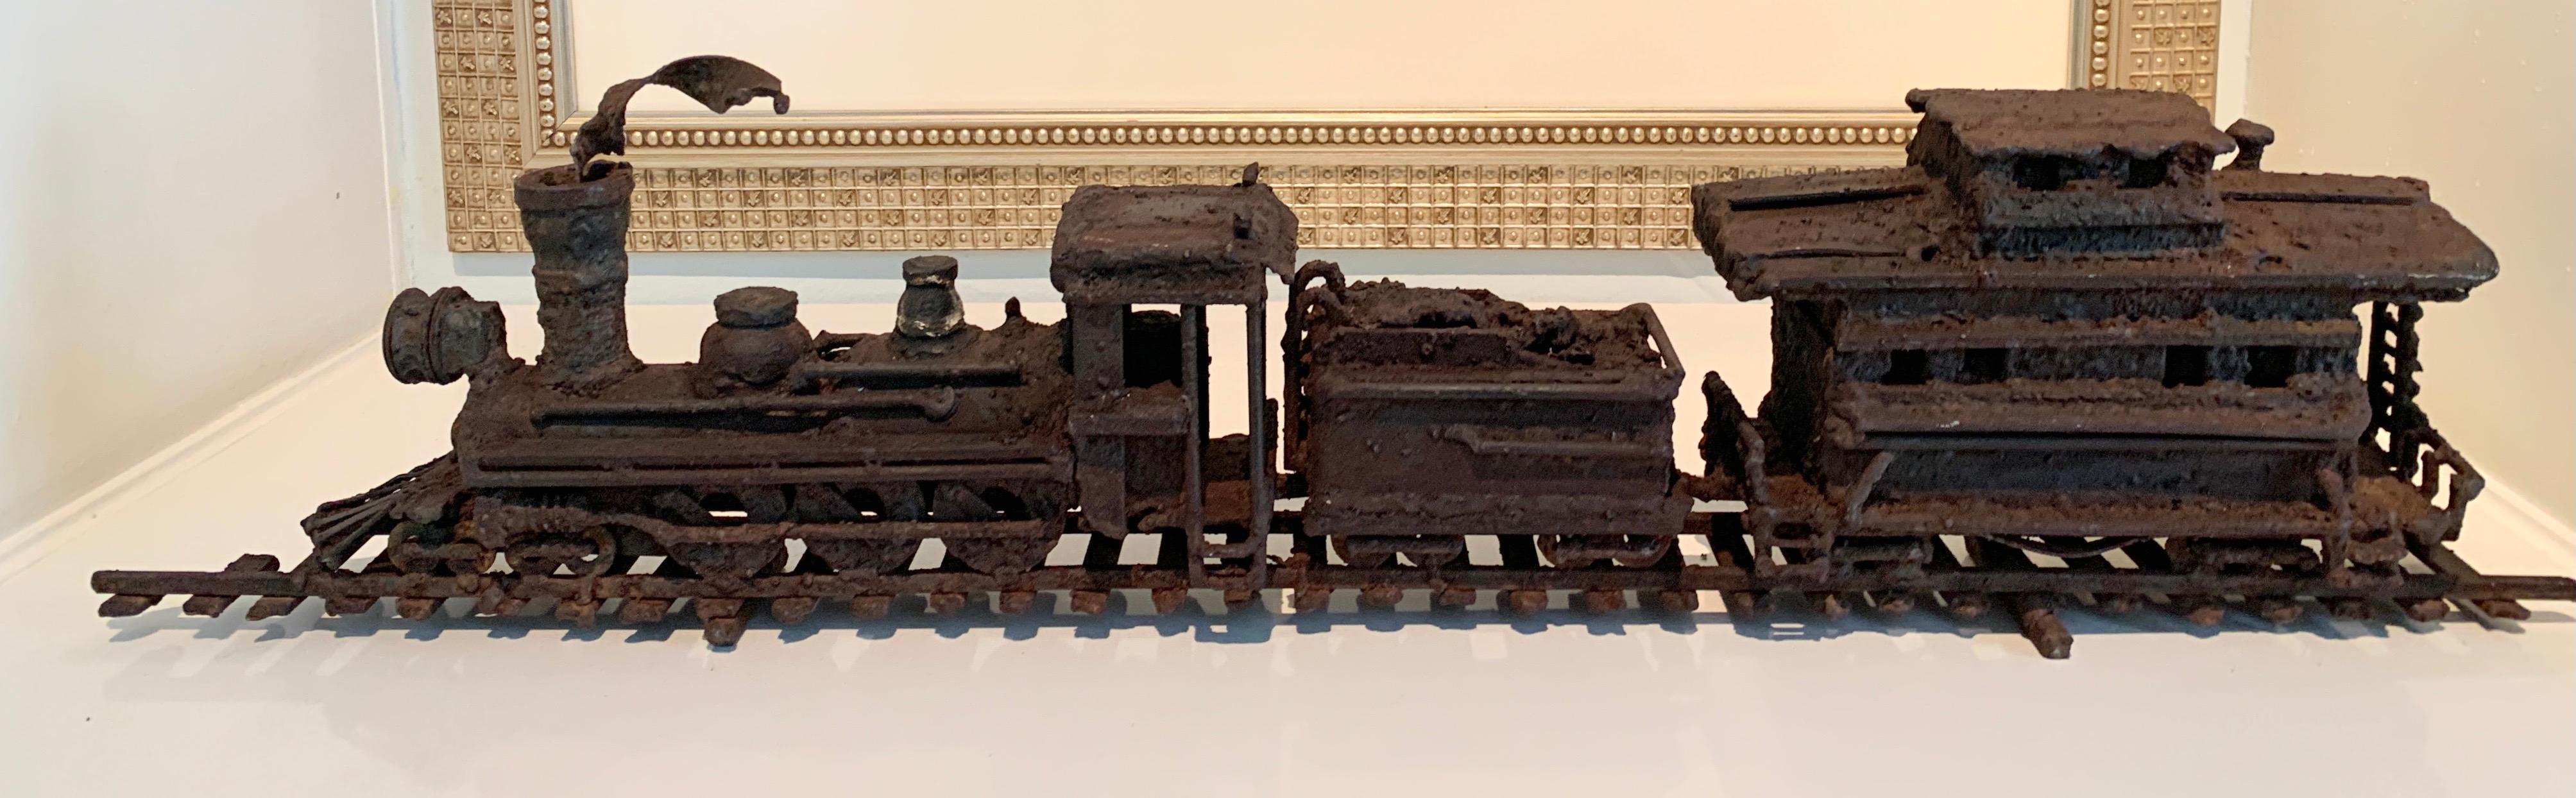 Iron Brutalist Sculpture of Train on Track with Smoke For Sale